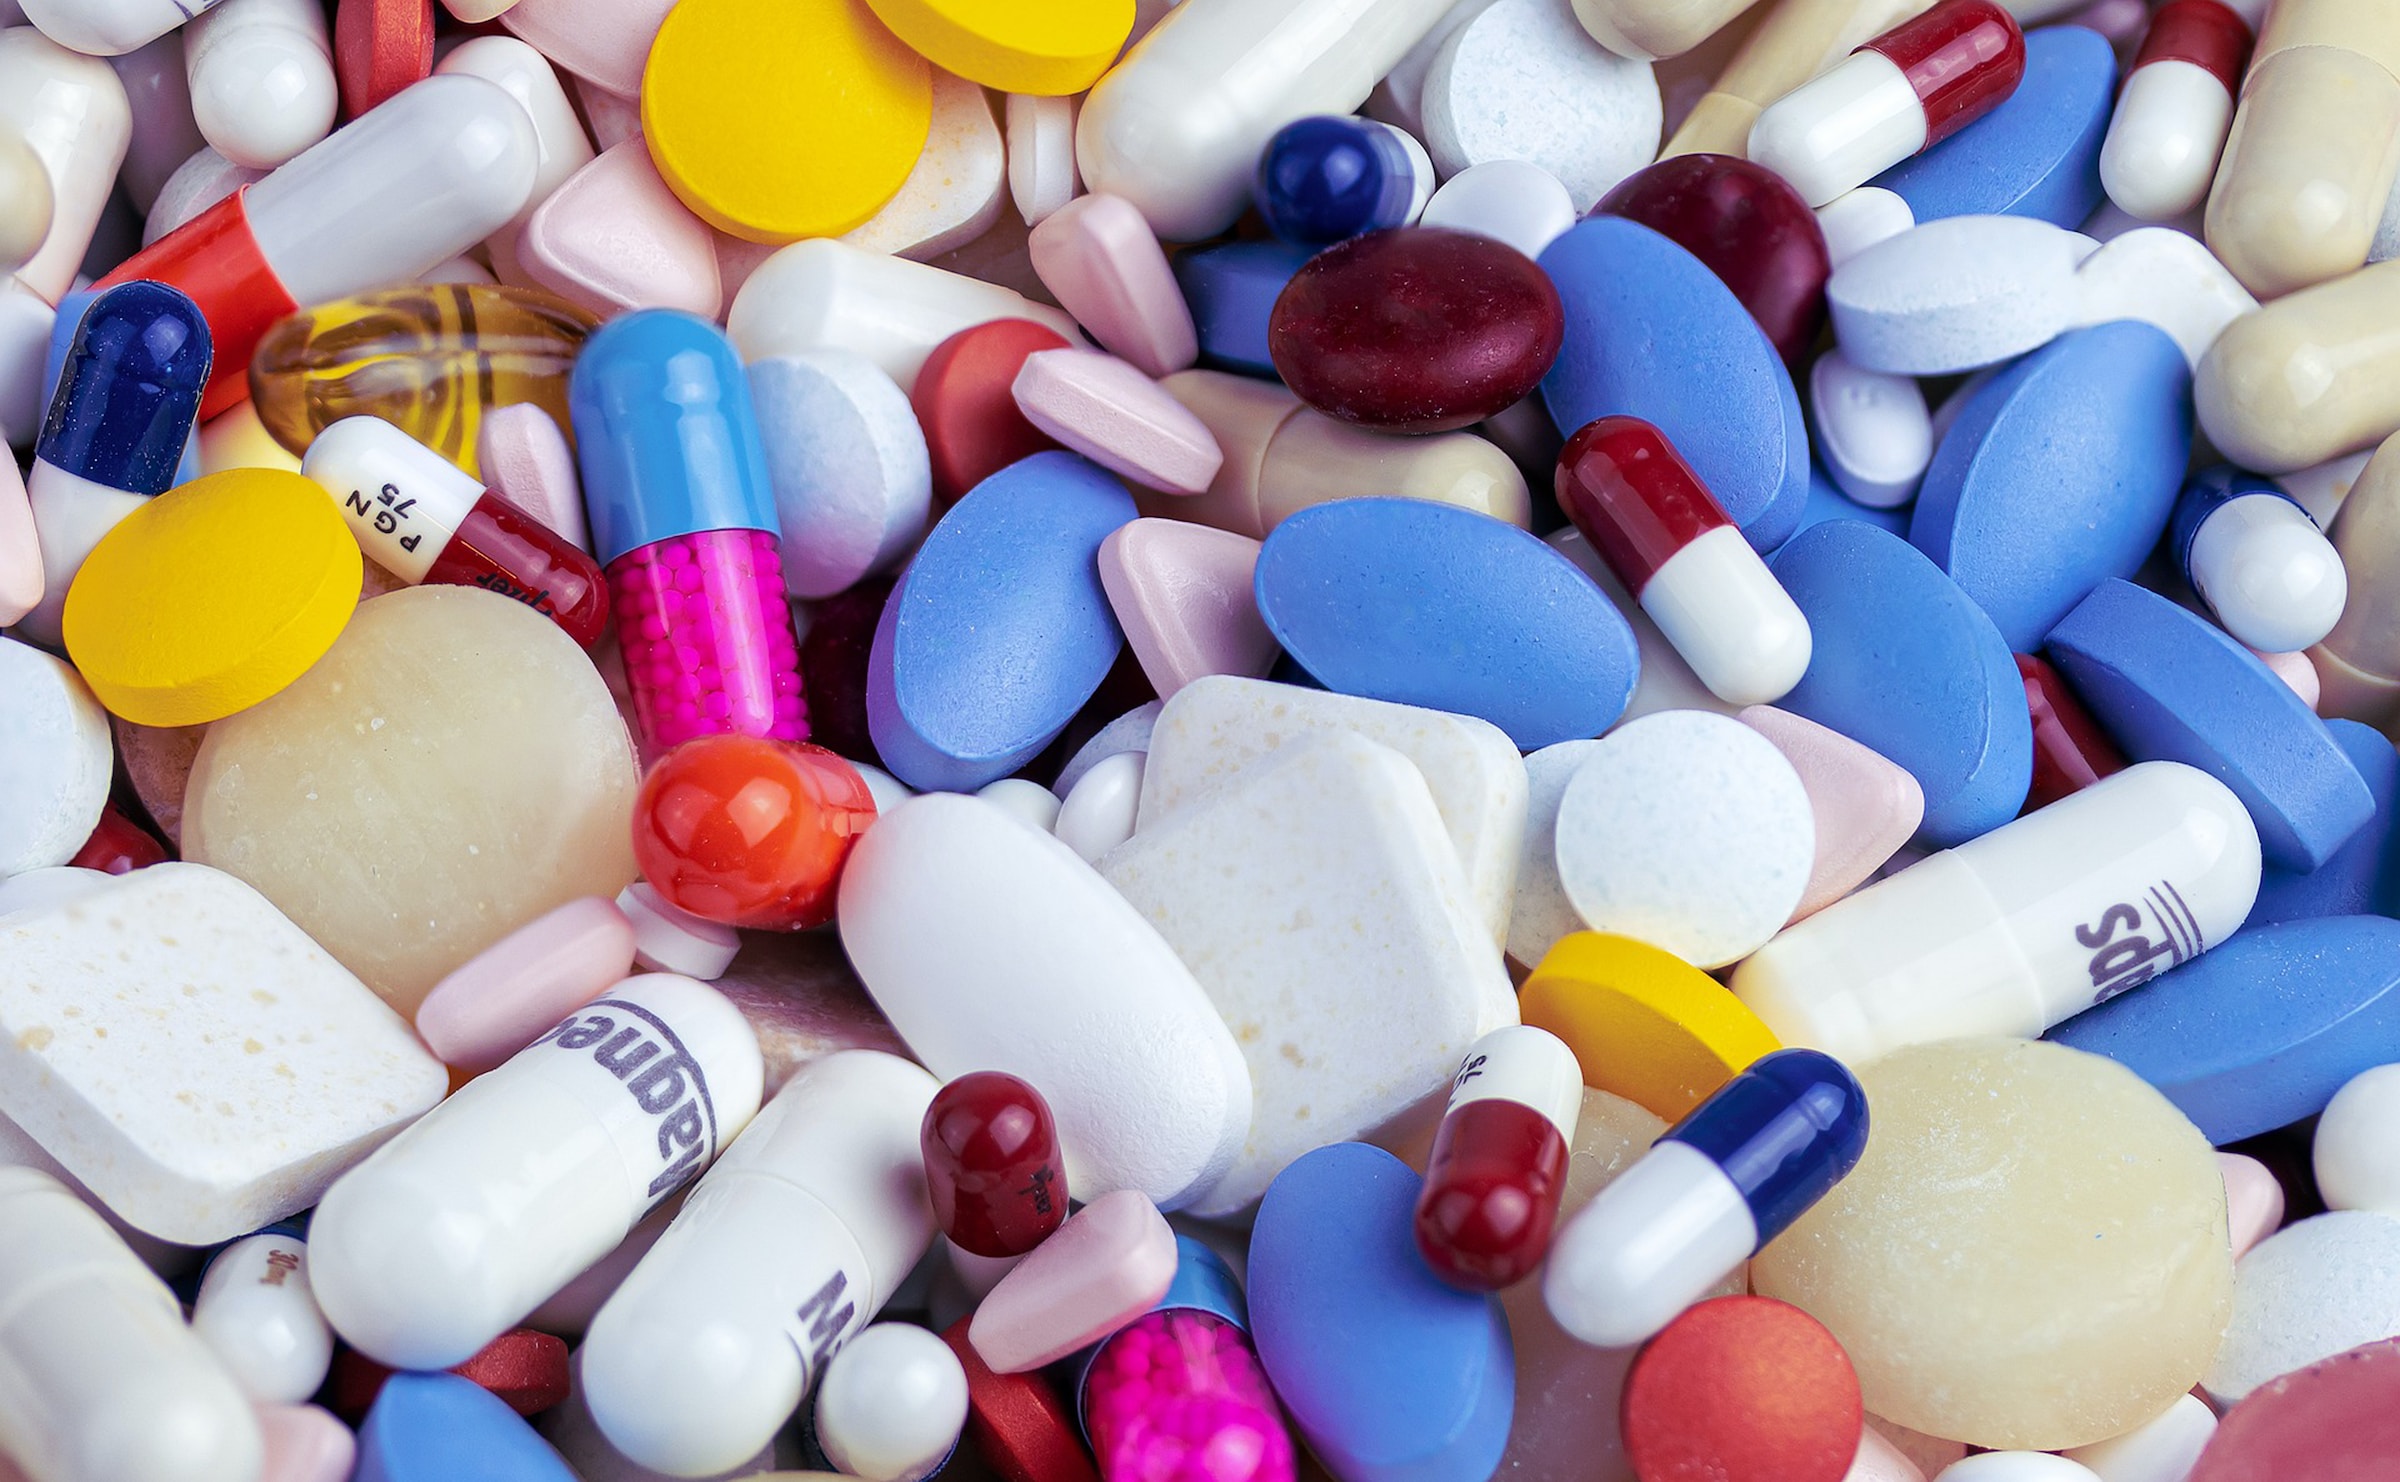 Hundreds of brightly coloured tablets and capsules